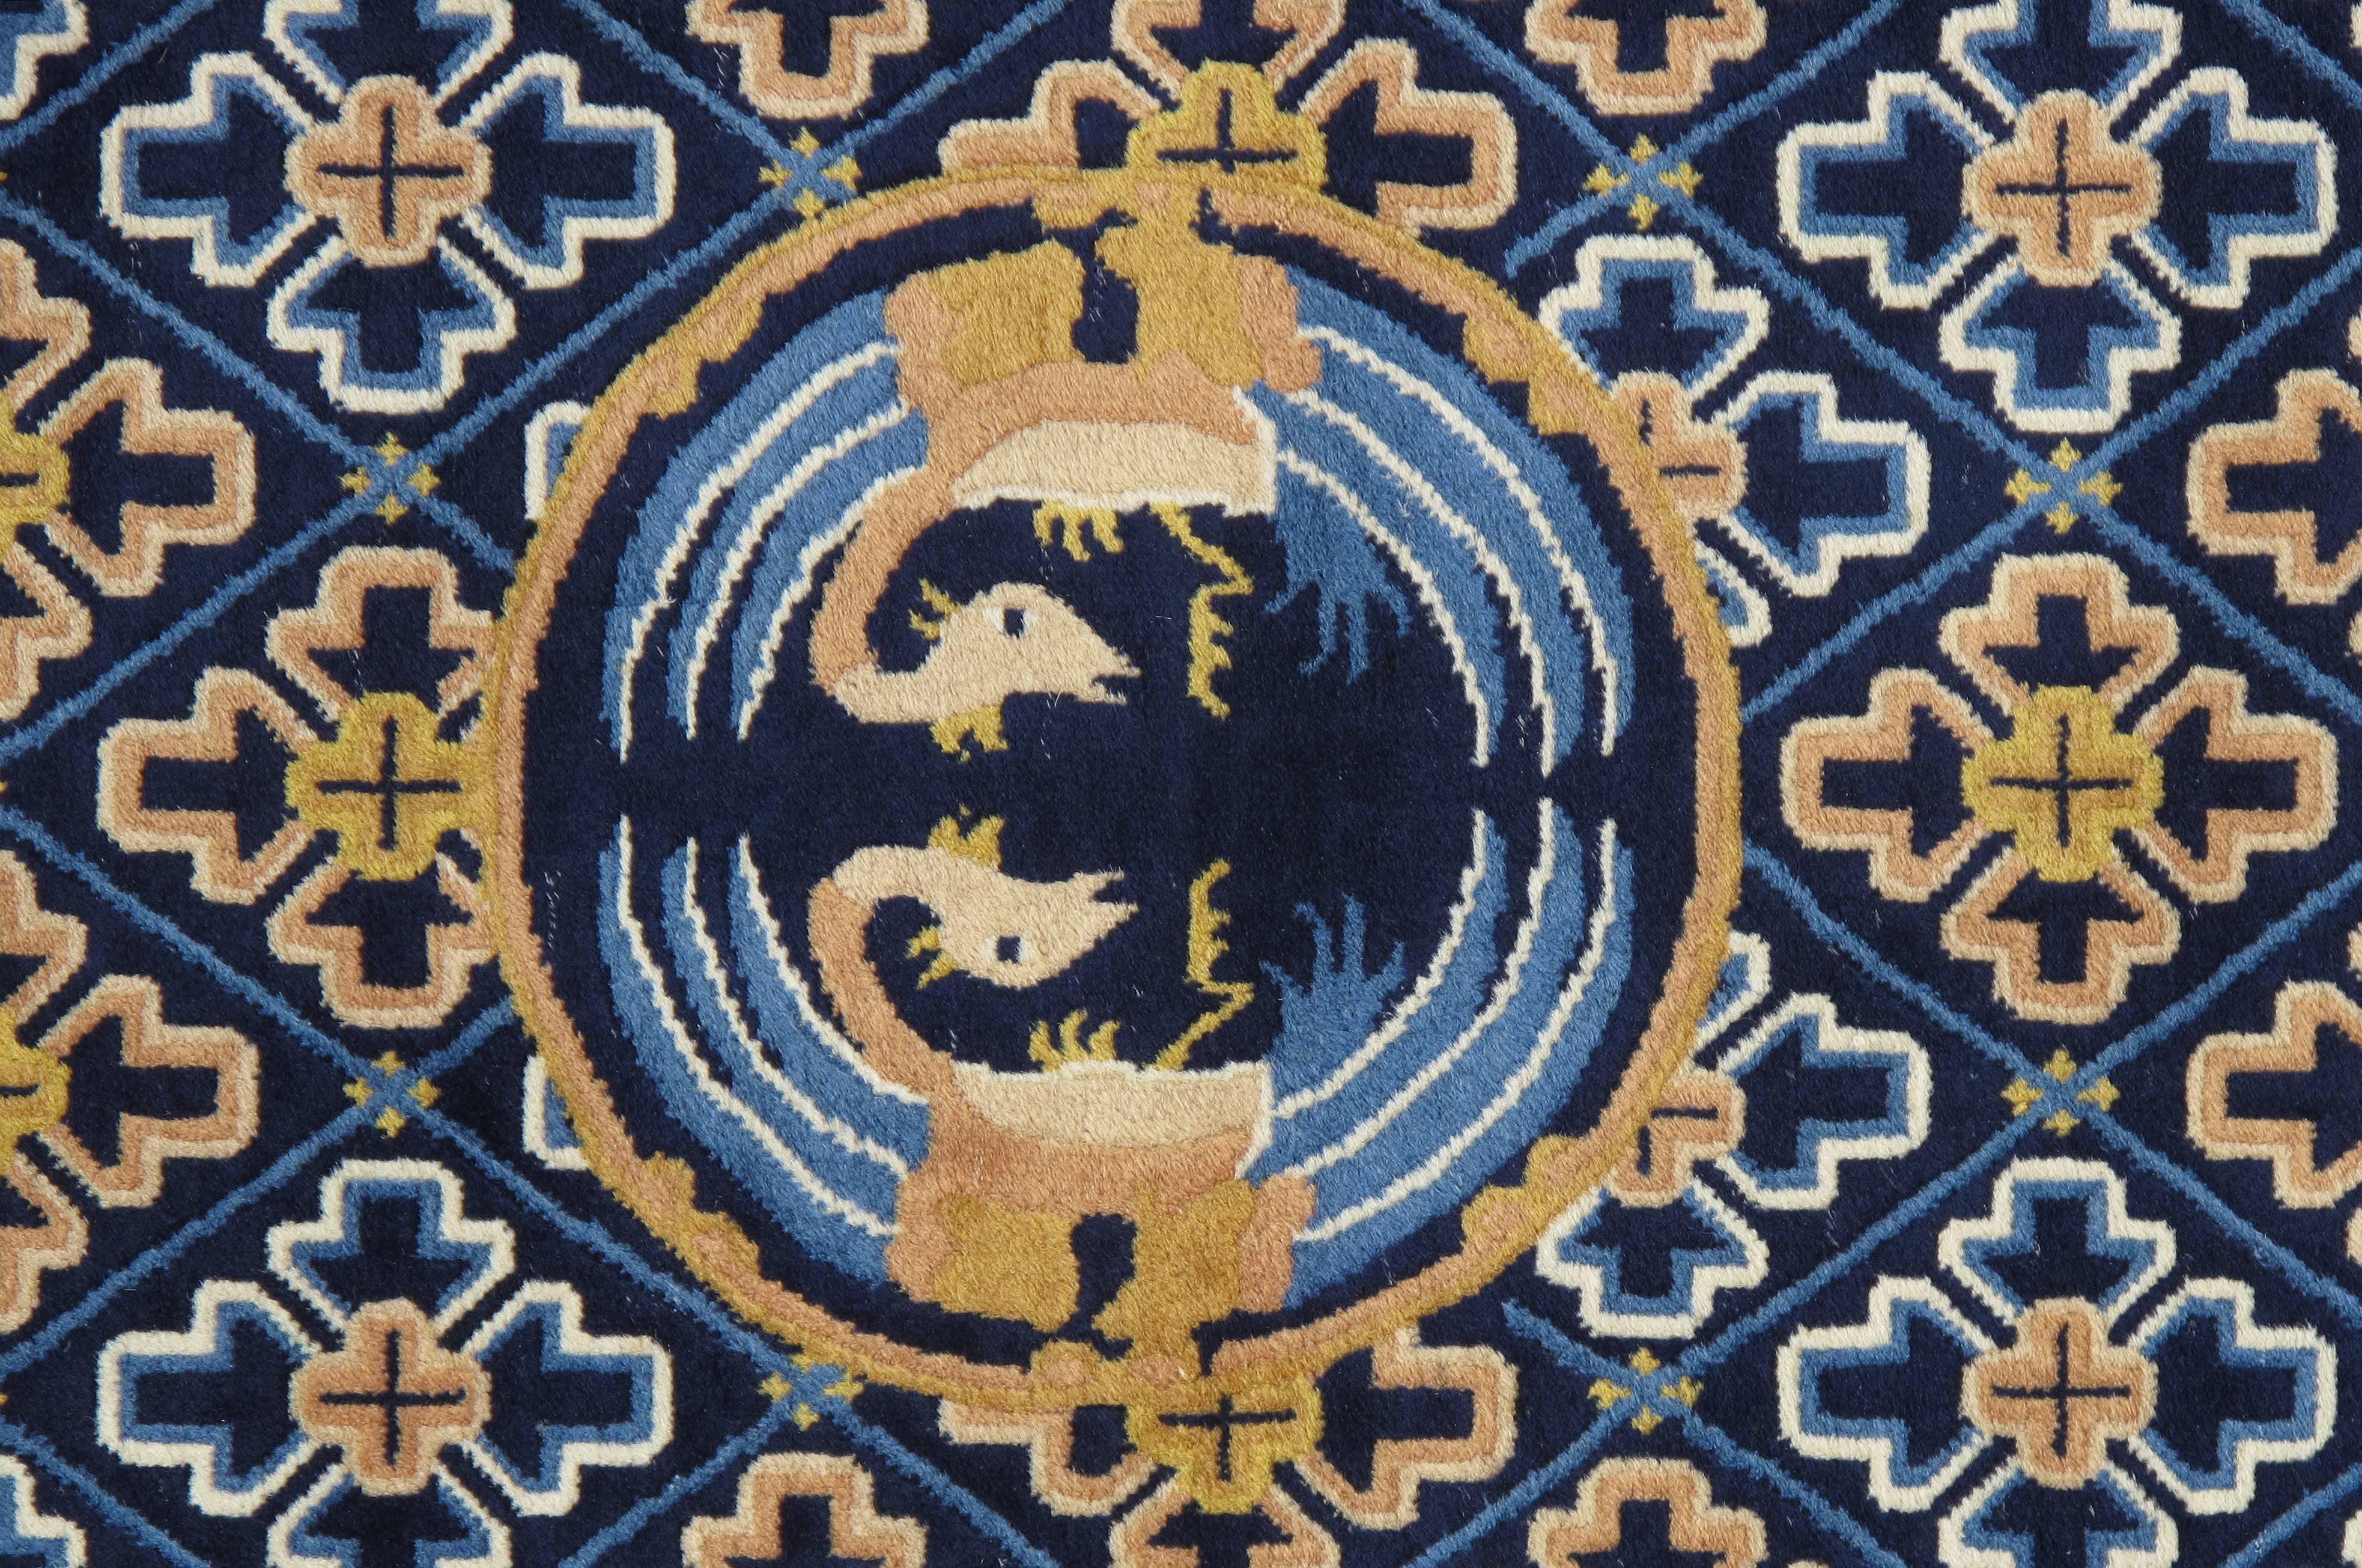 Chinese Export Vintage Chinese Runner, Handmade, Oriental Rug, Blue, Gold, Ivory